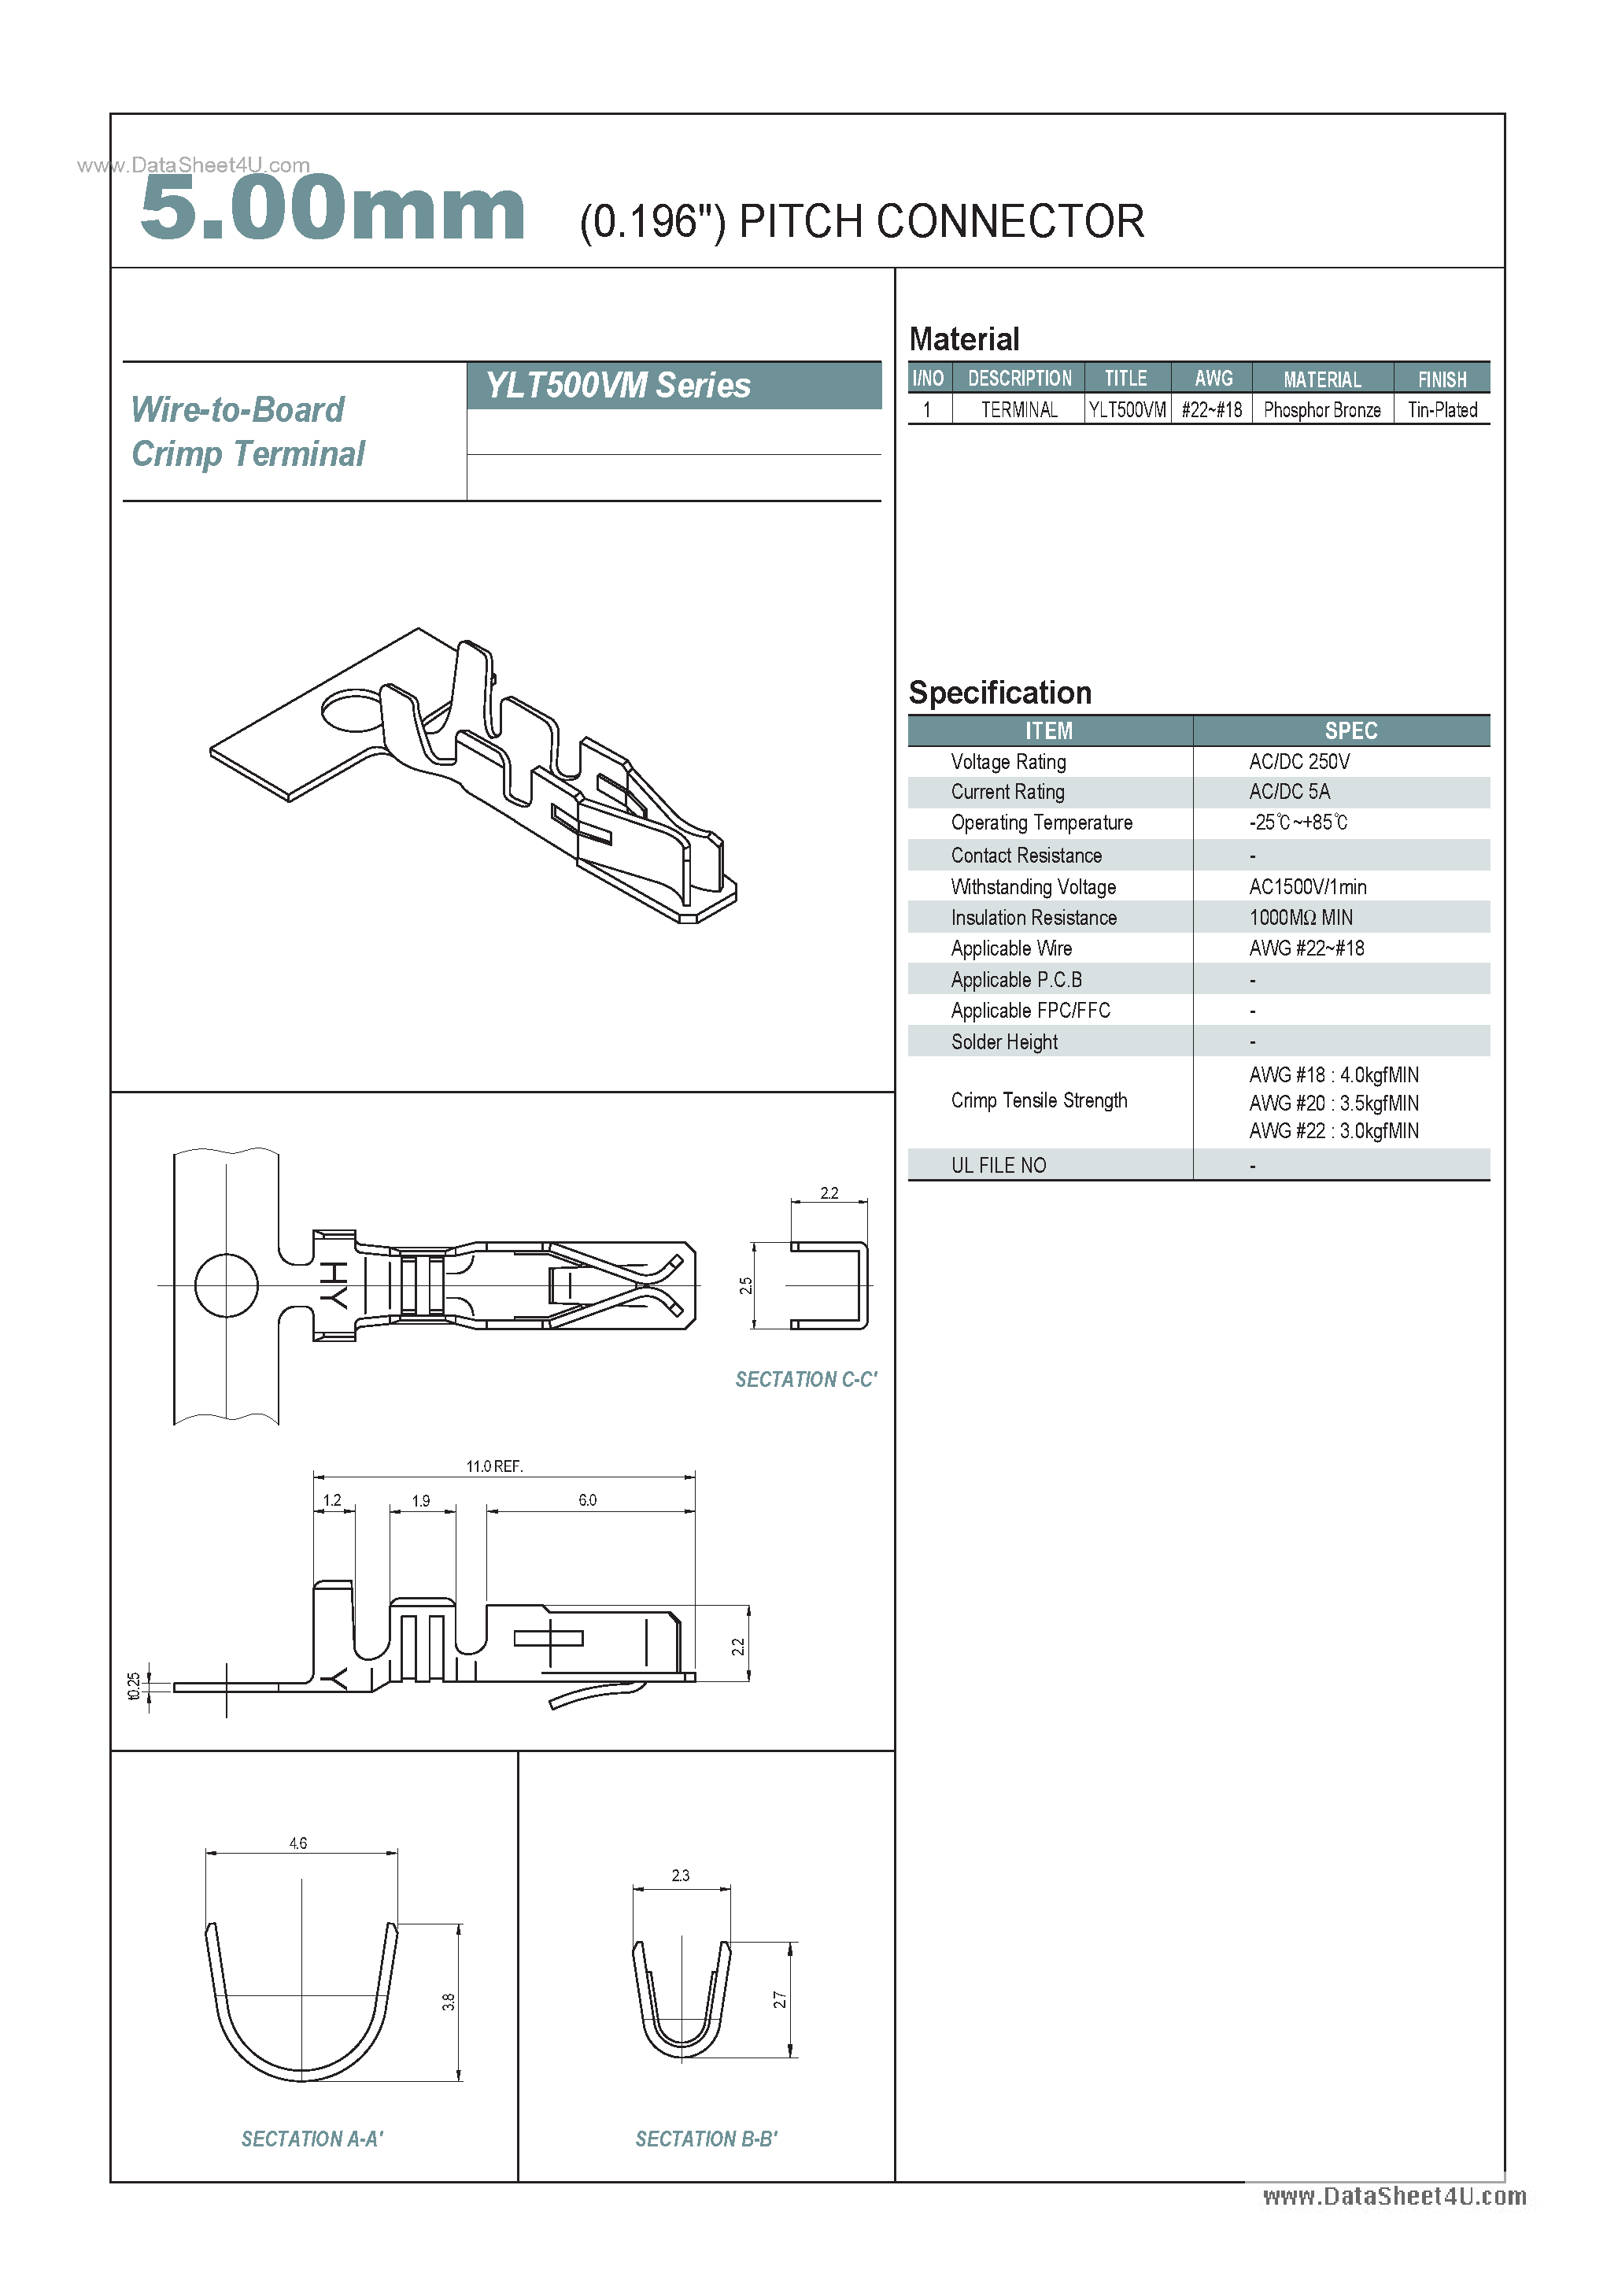 Datasheet YLT500VM - 5.00mm PITCH CONNECTOR page 1